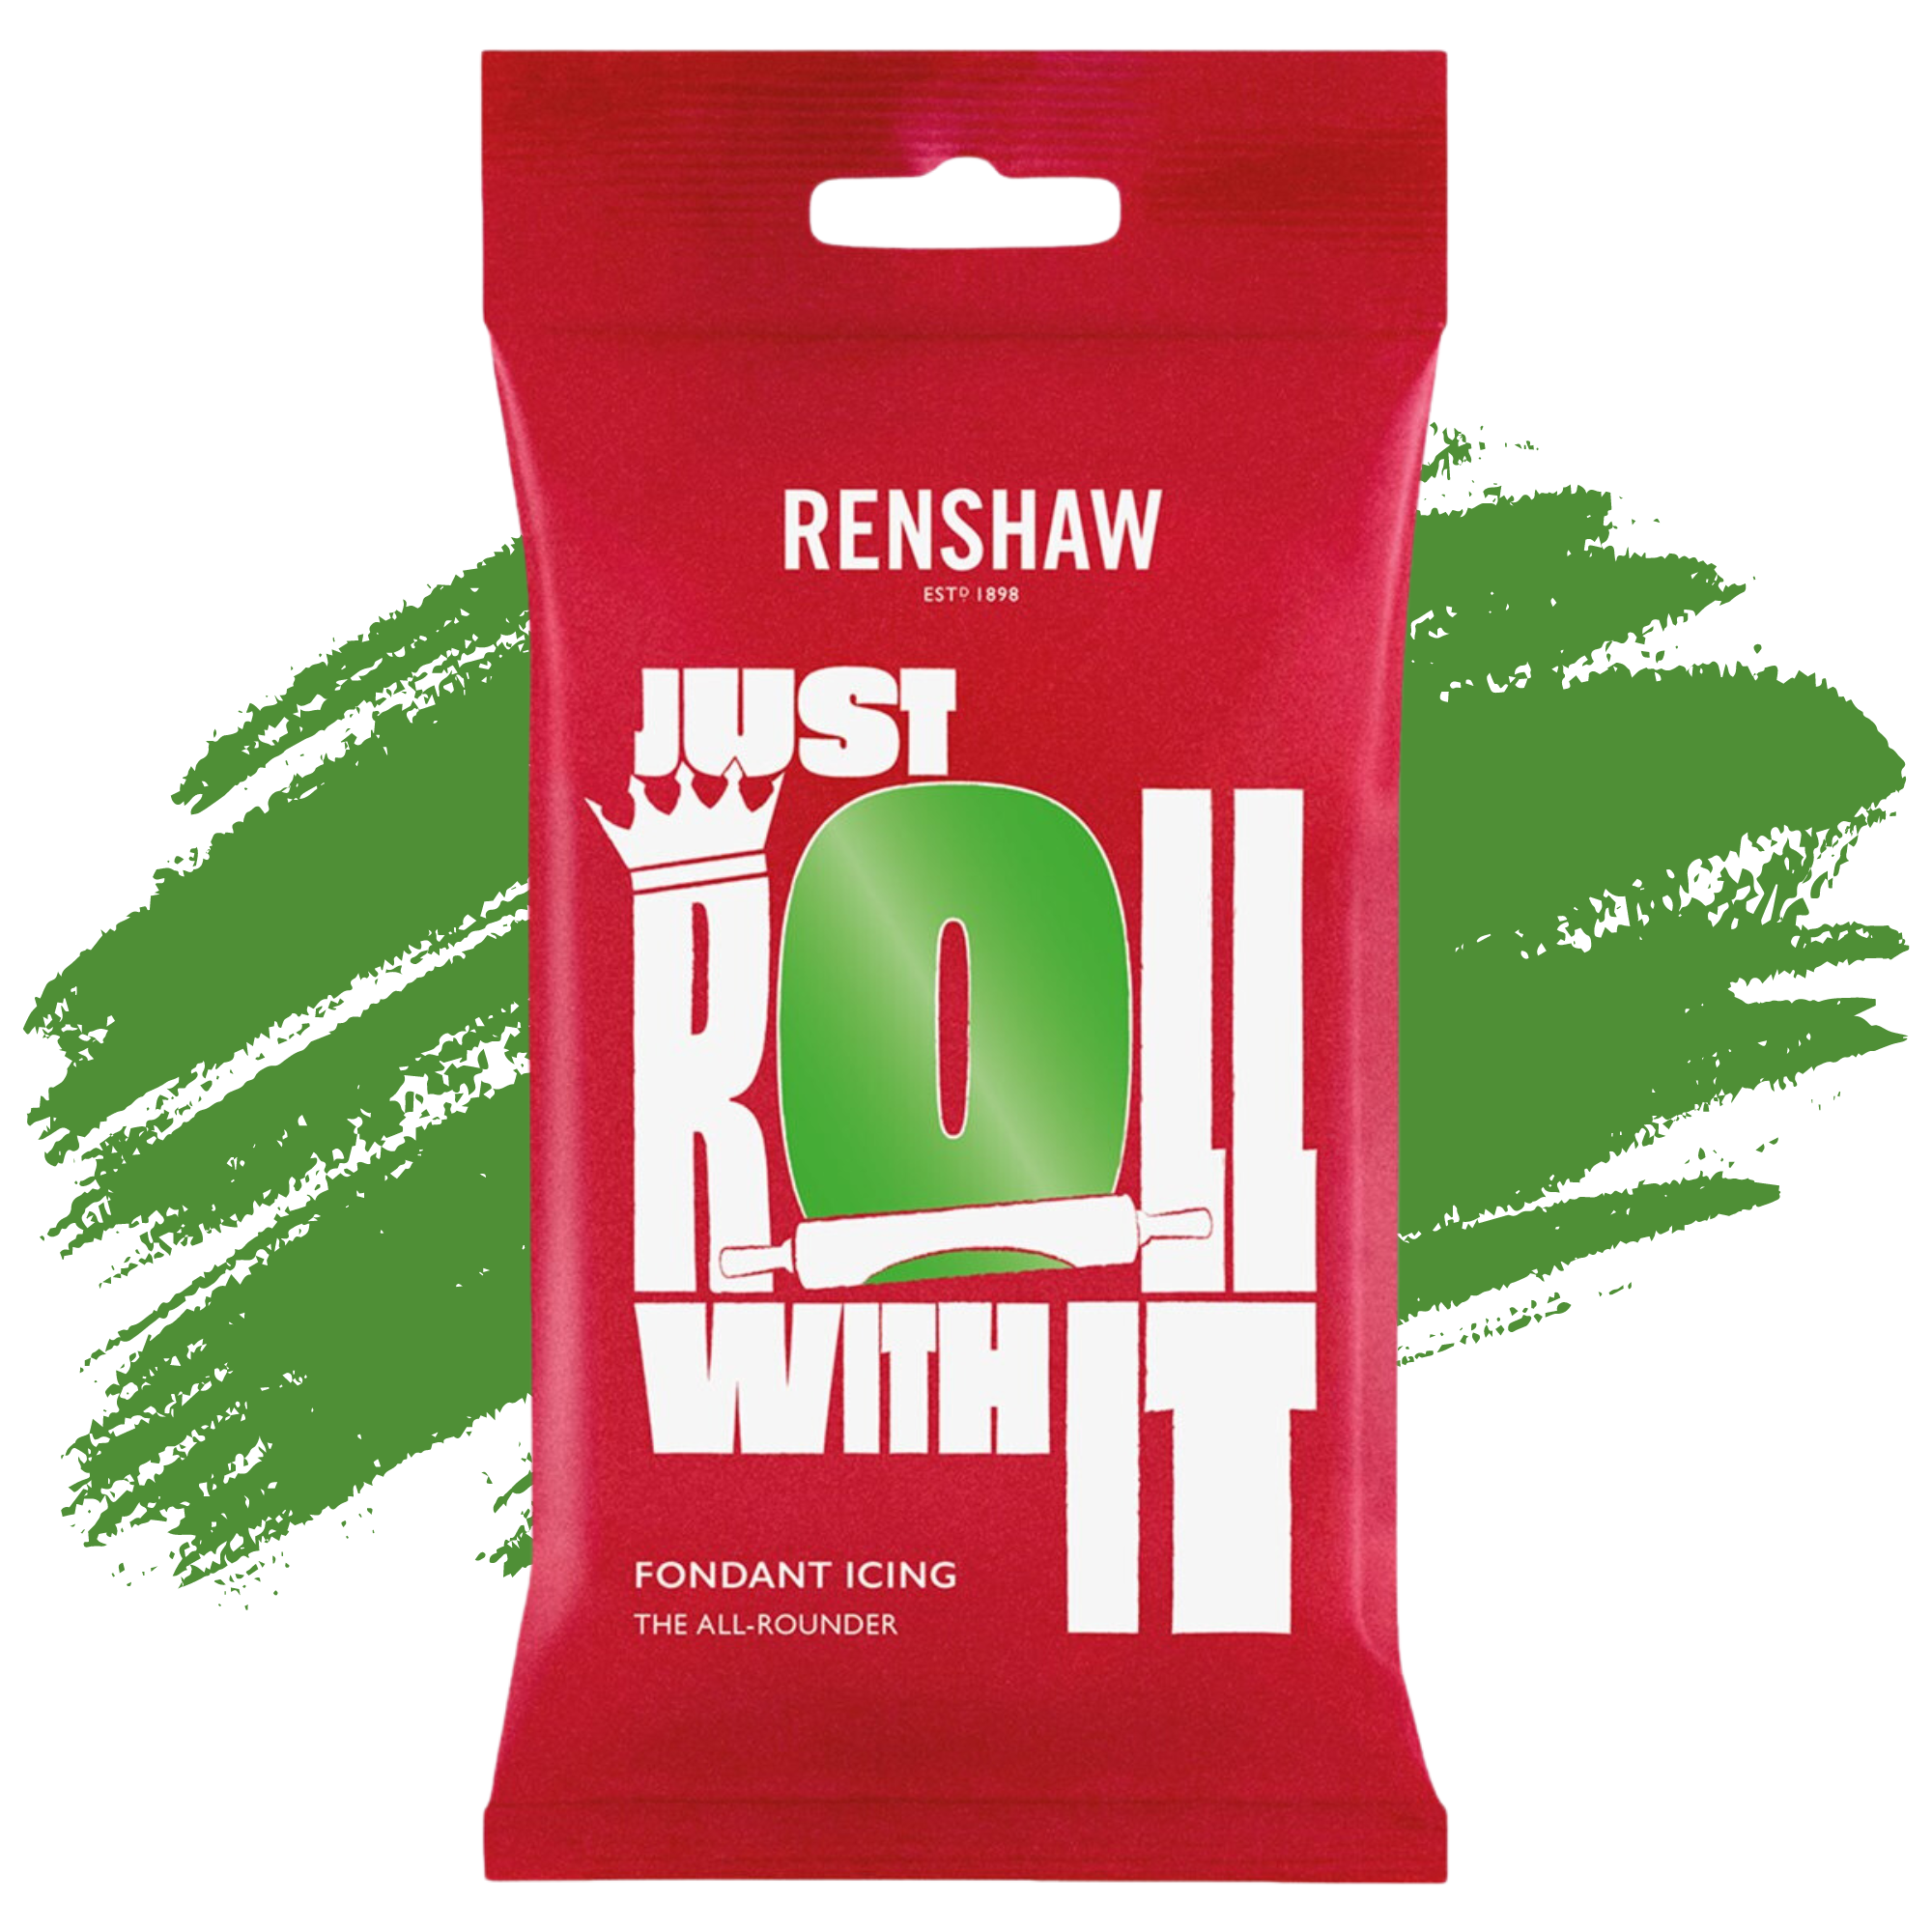 Renshaw Professional Sugar Paste Ready to Roll Fondant Just Roll with it Icing - Lincoln Green - 250g